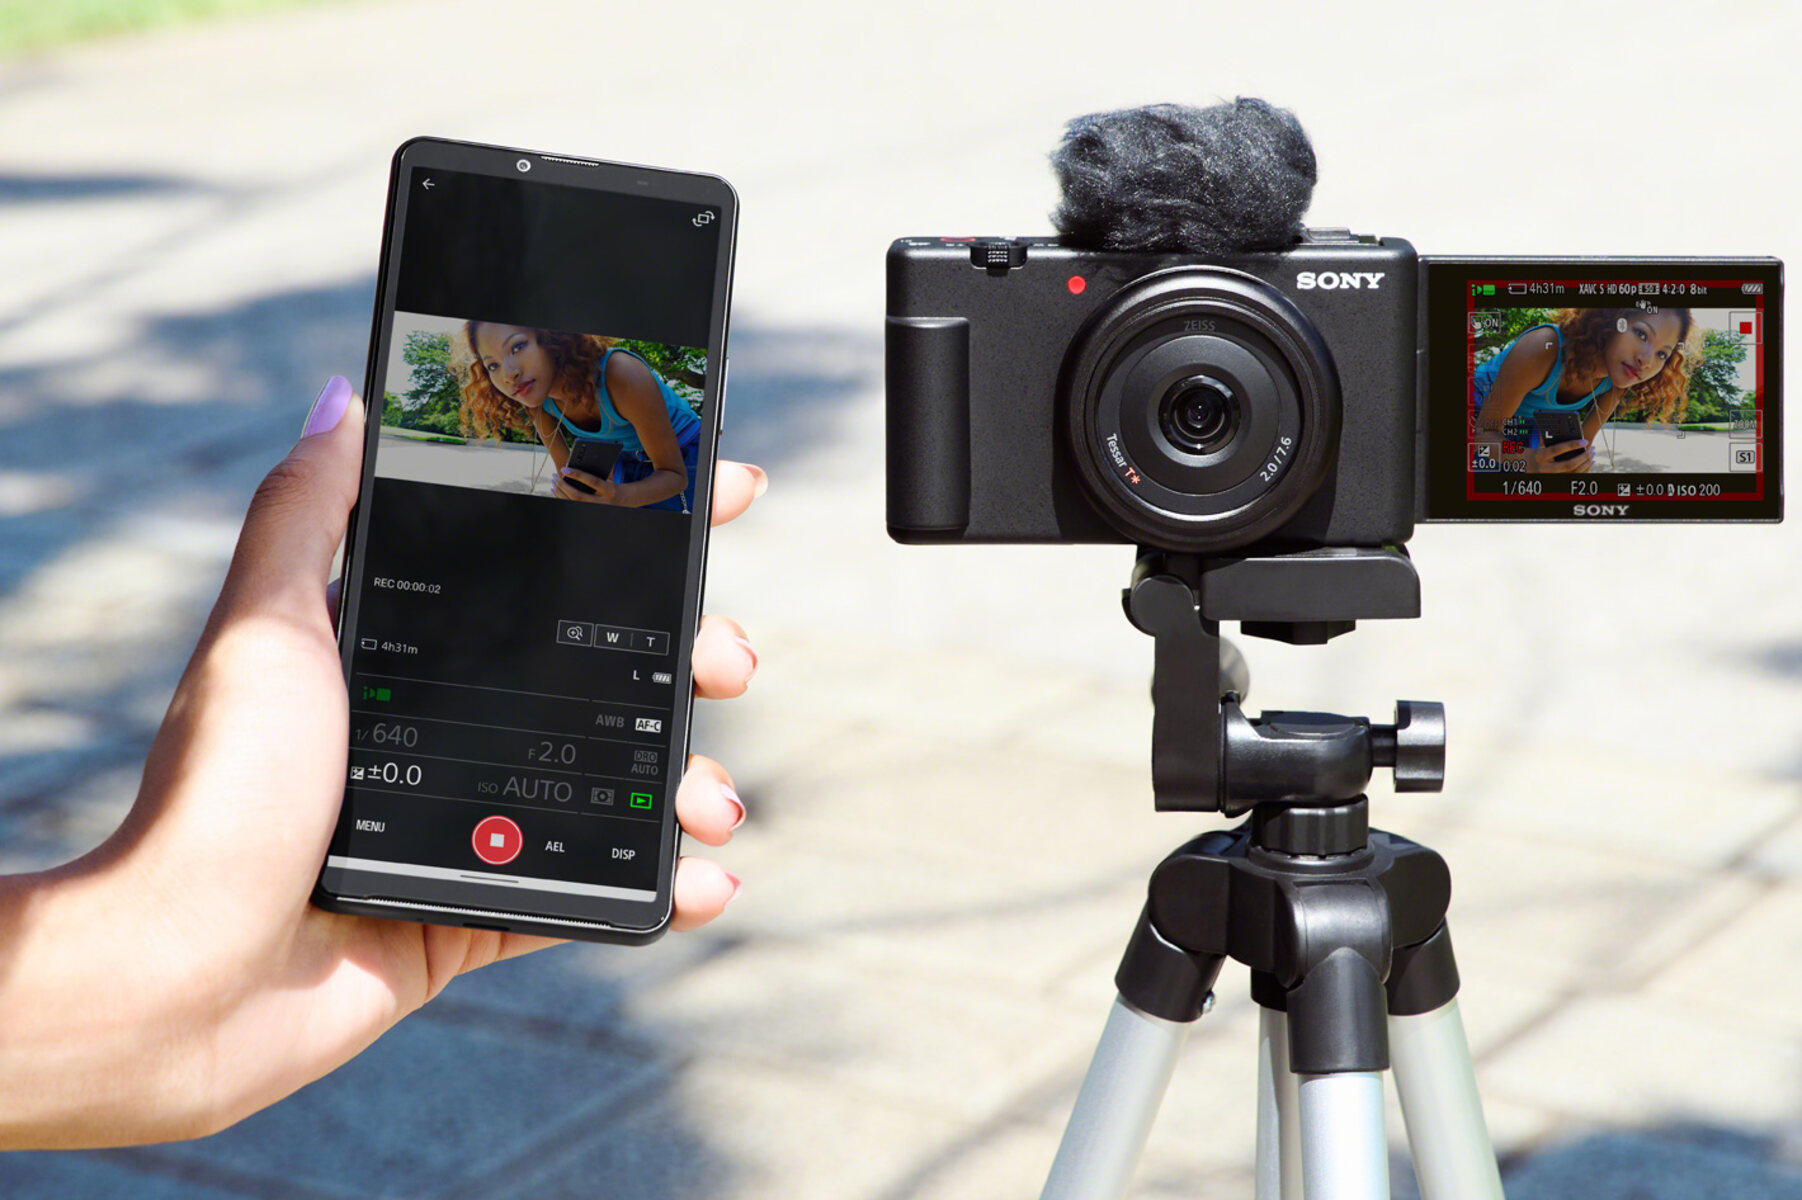 How To Transfer Photos From Sony Cybershot To Smartphone